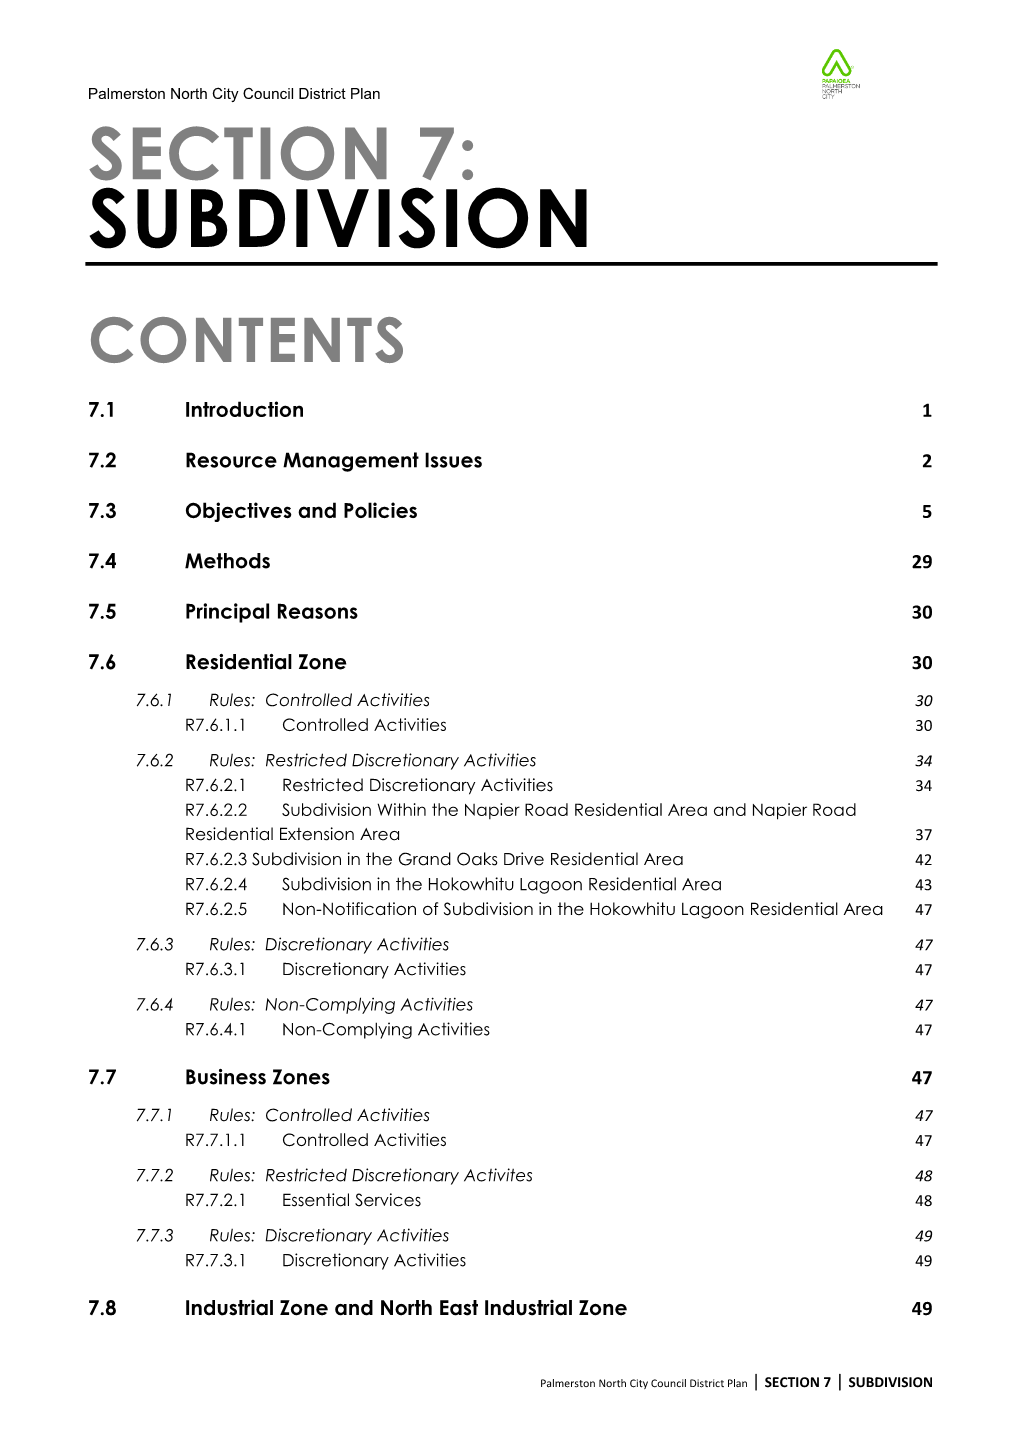 Section 7: Subdivision